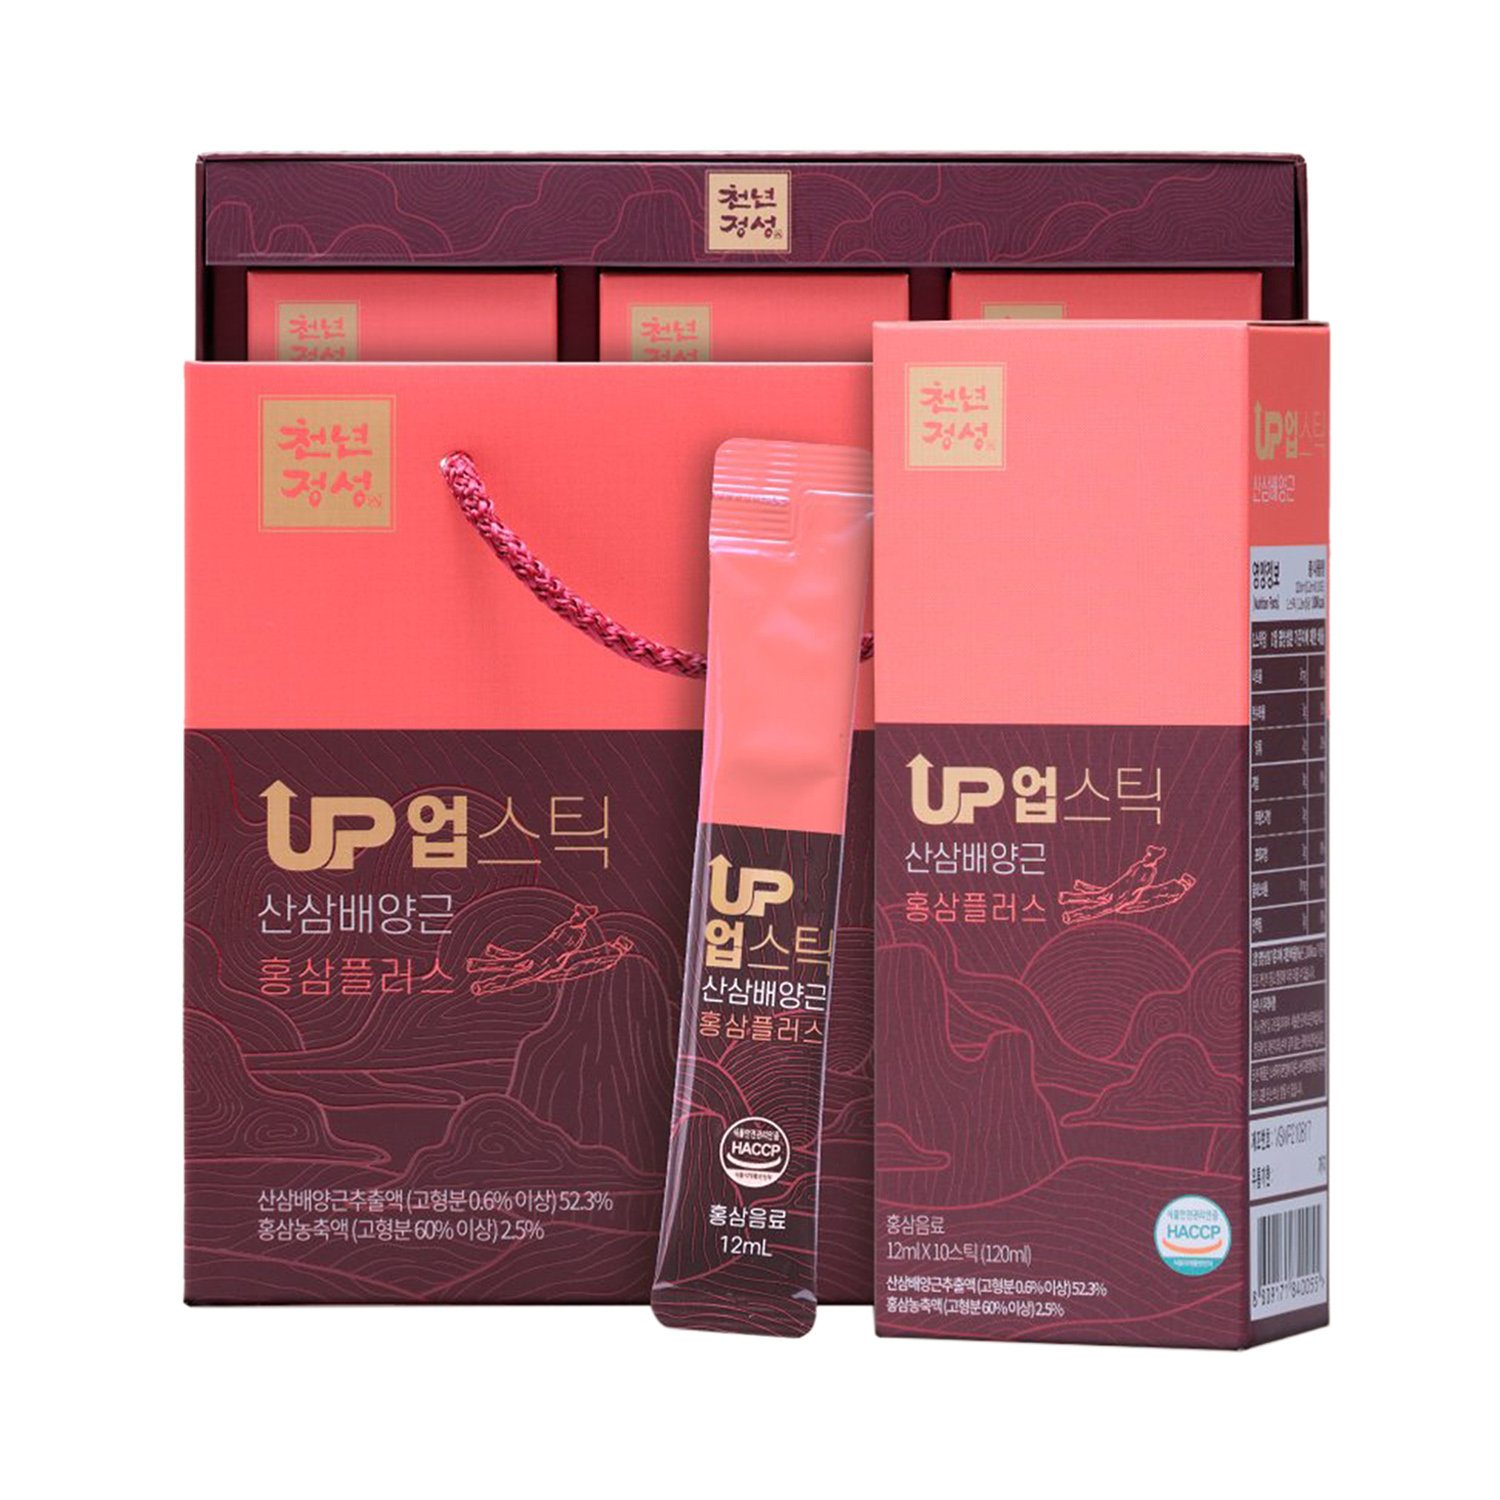 [VITROSIS] UPSTICK WILD GINSENG CULTURED ROOTS RED GINSENG PLUS (30 PACKETS)